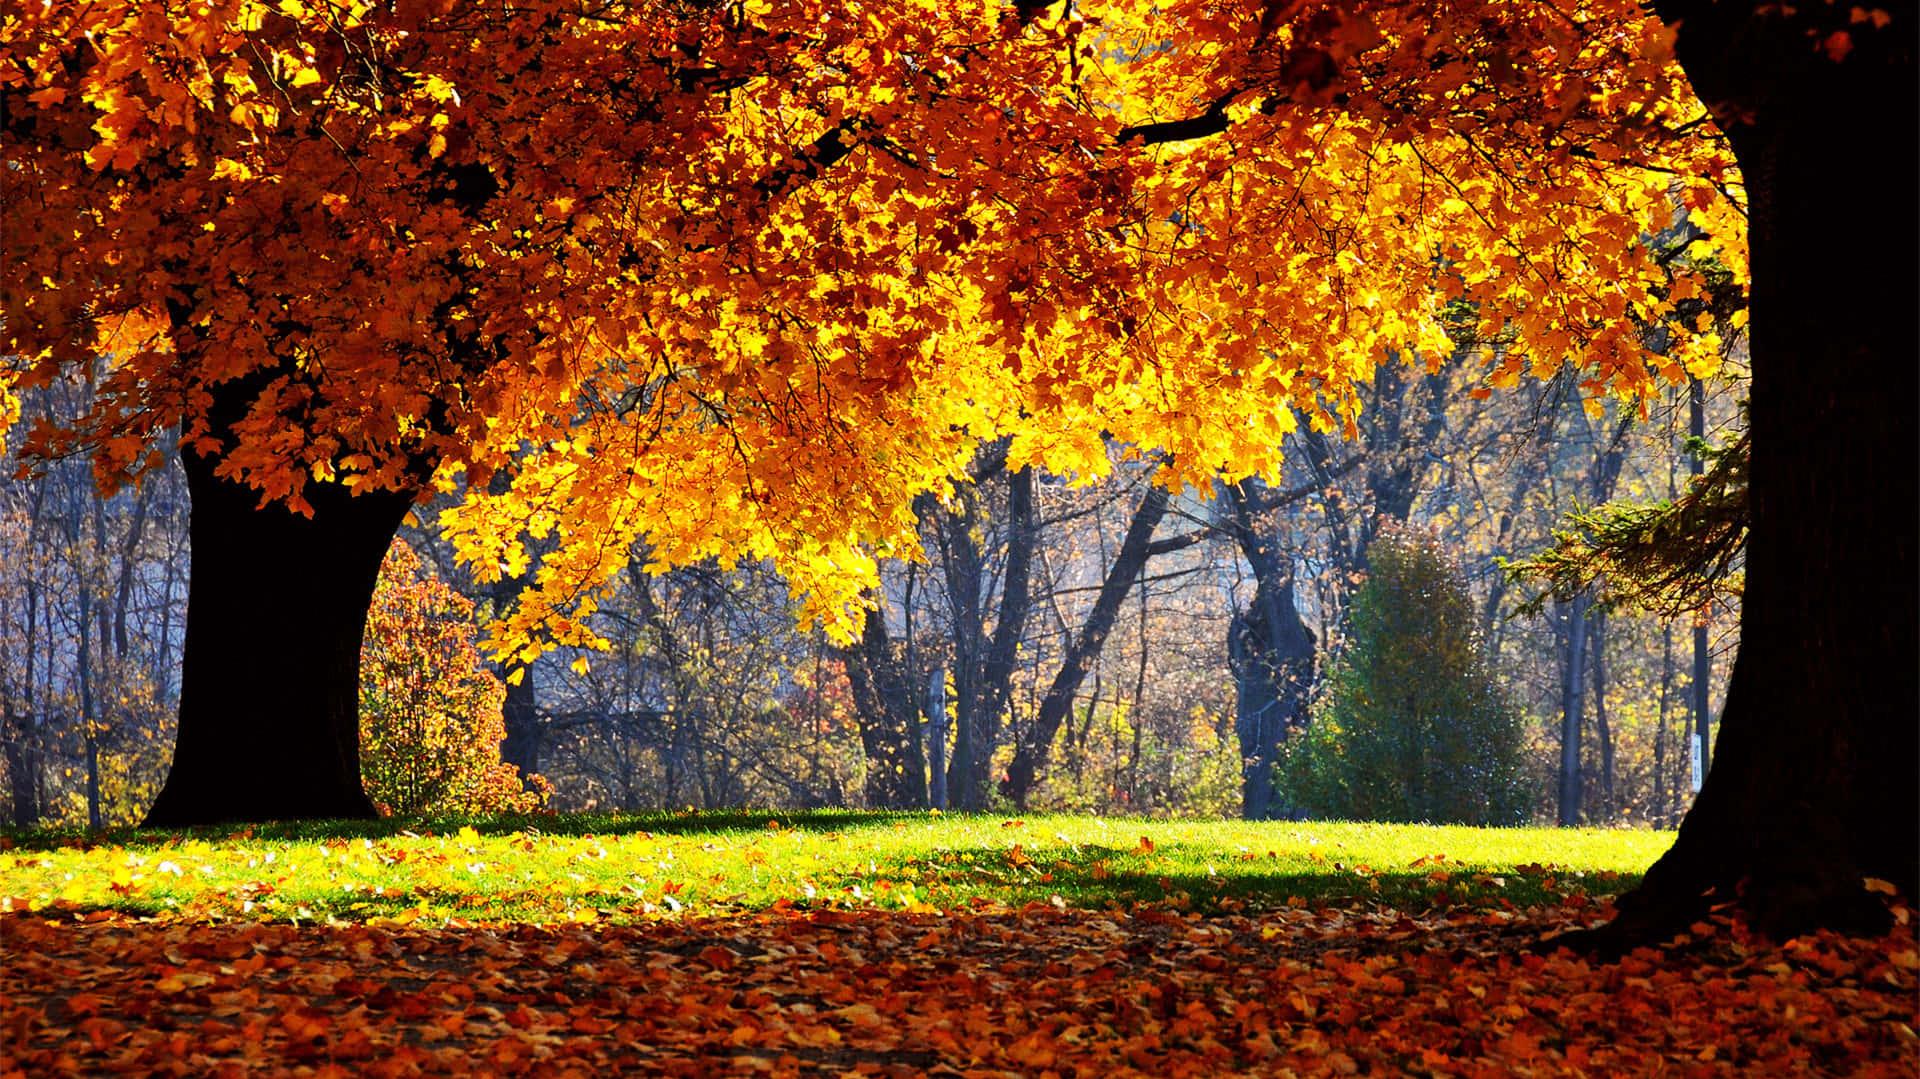 Enjoy The Beauty Of Nature During Fall Season